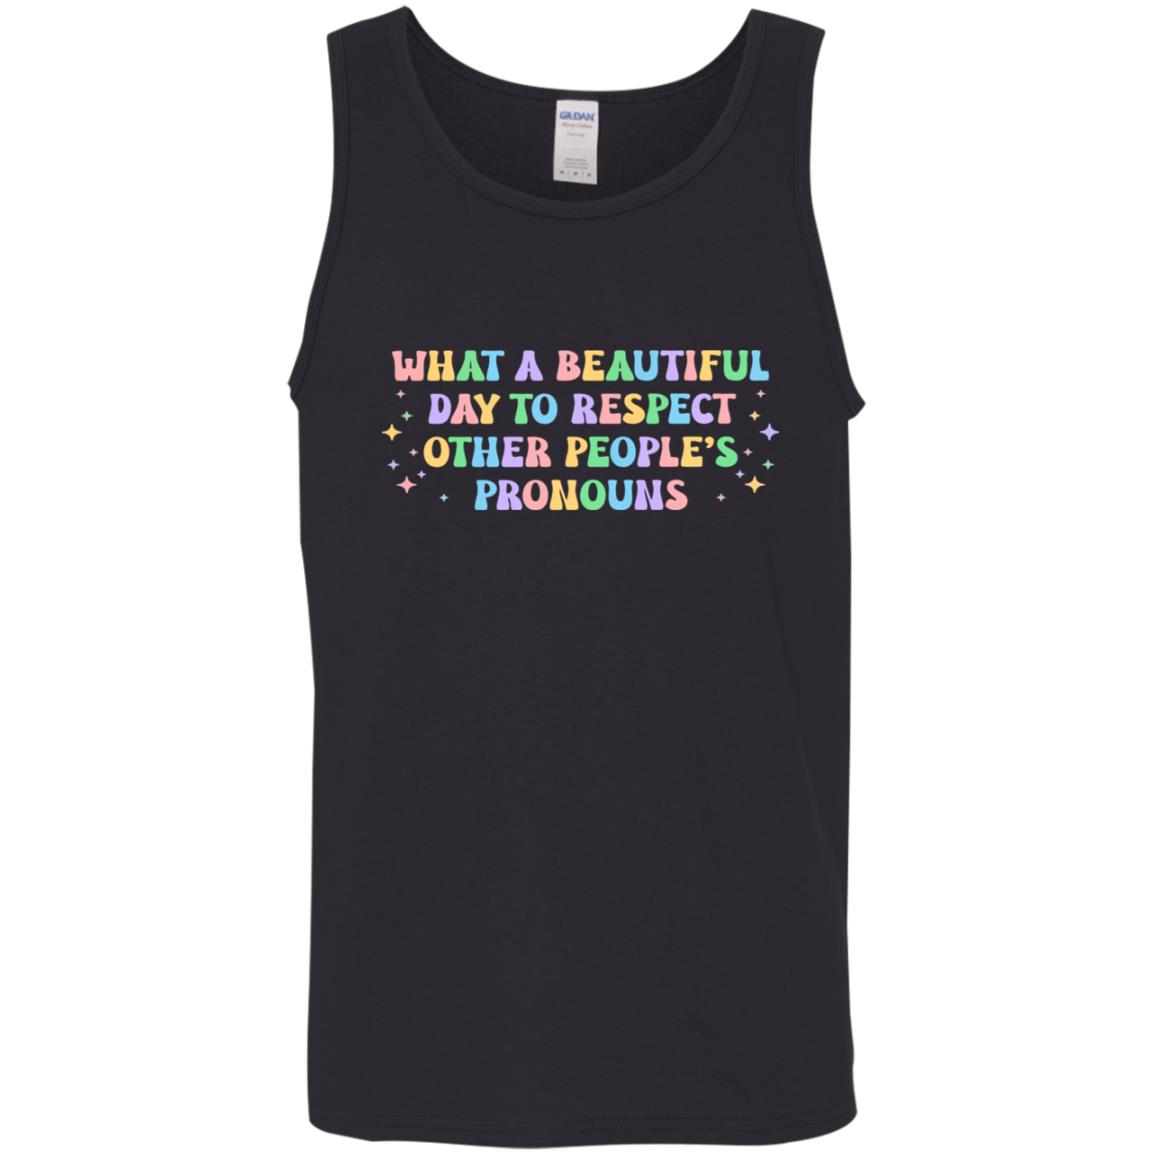 what a beautiful day to respect other people's pronouns shirt, gay rights shirt